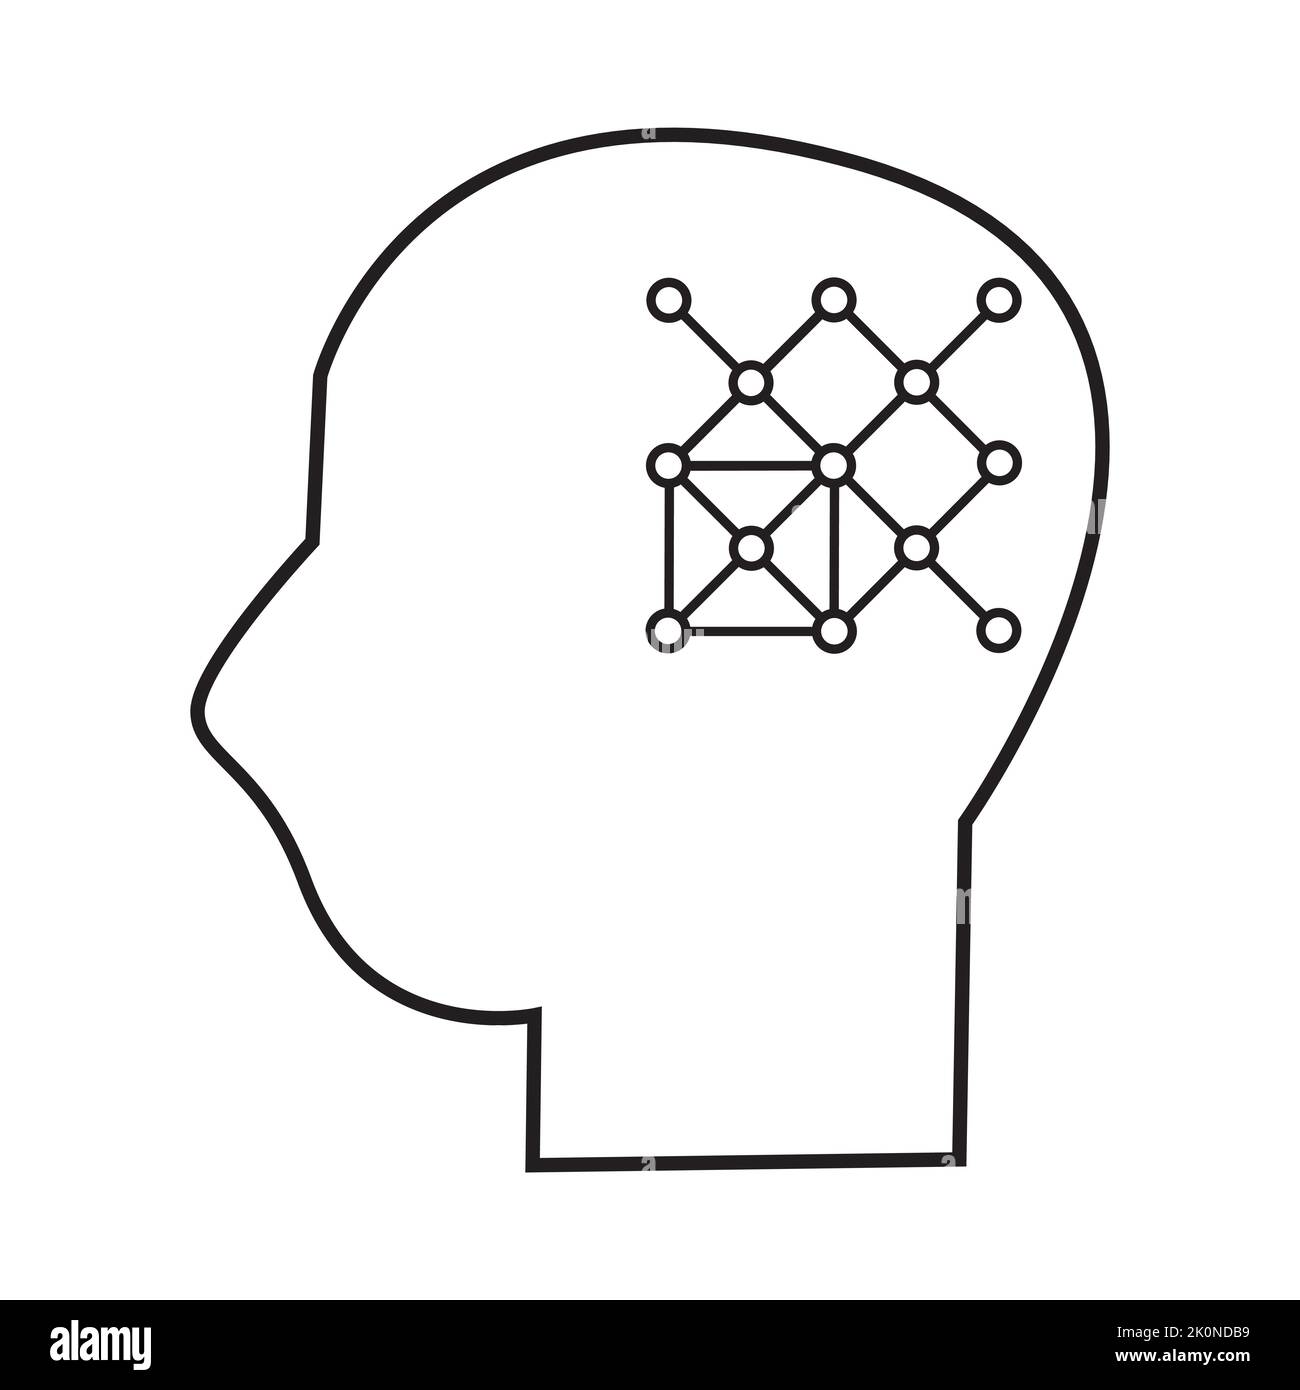 Simple icon of human brain artificial intelligence. Hand drawn style design for technology and ai concept Stock Vector